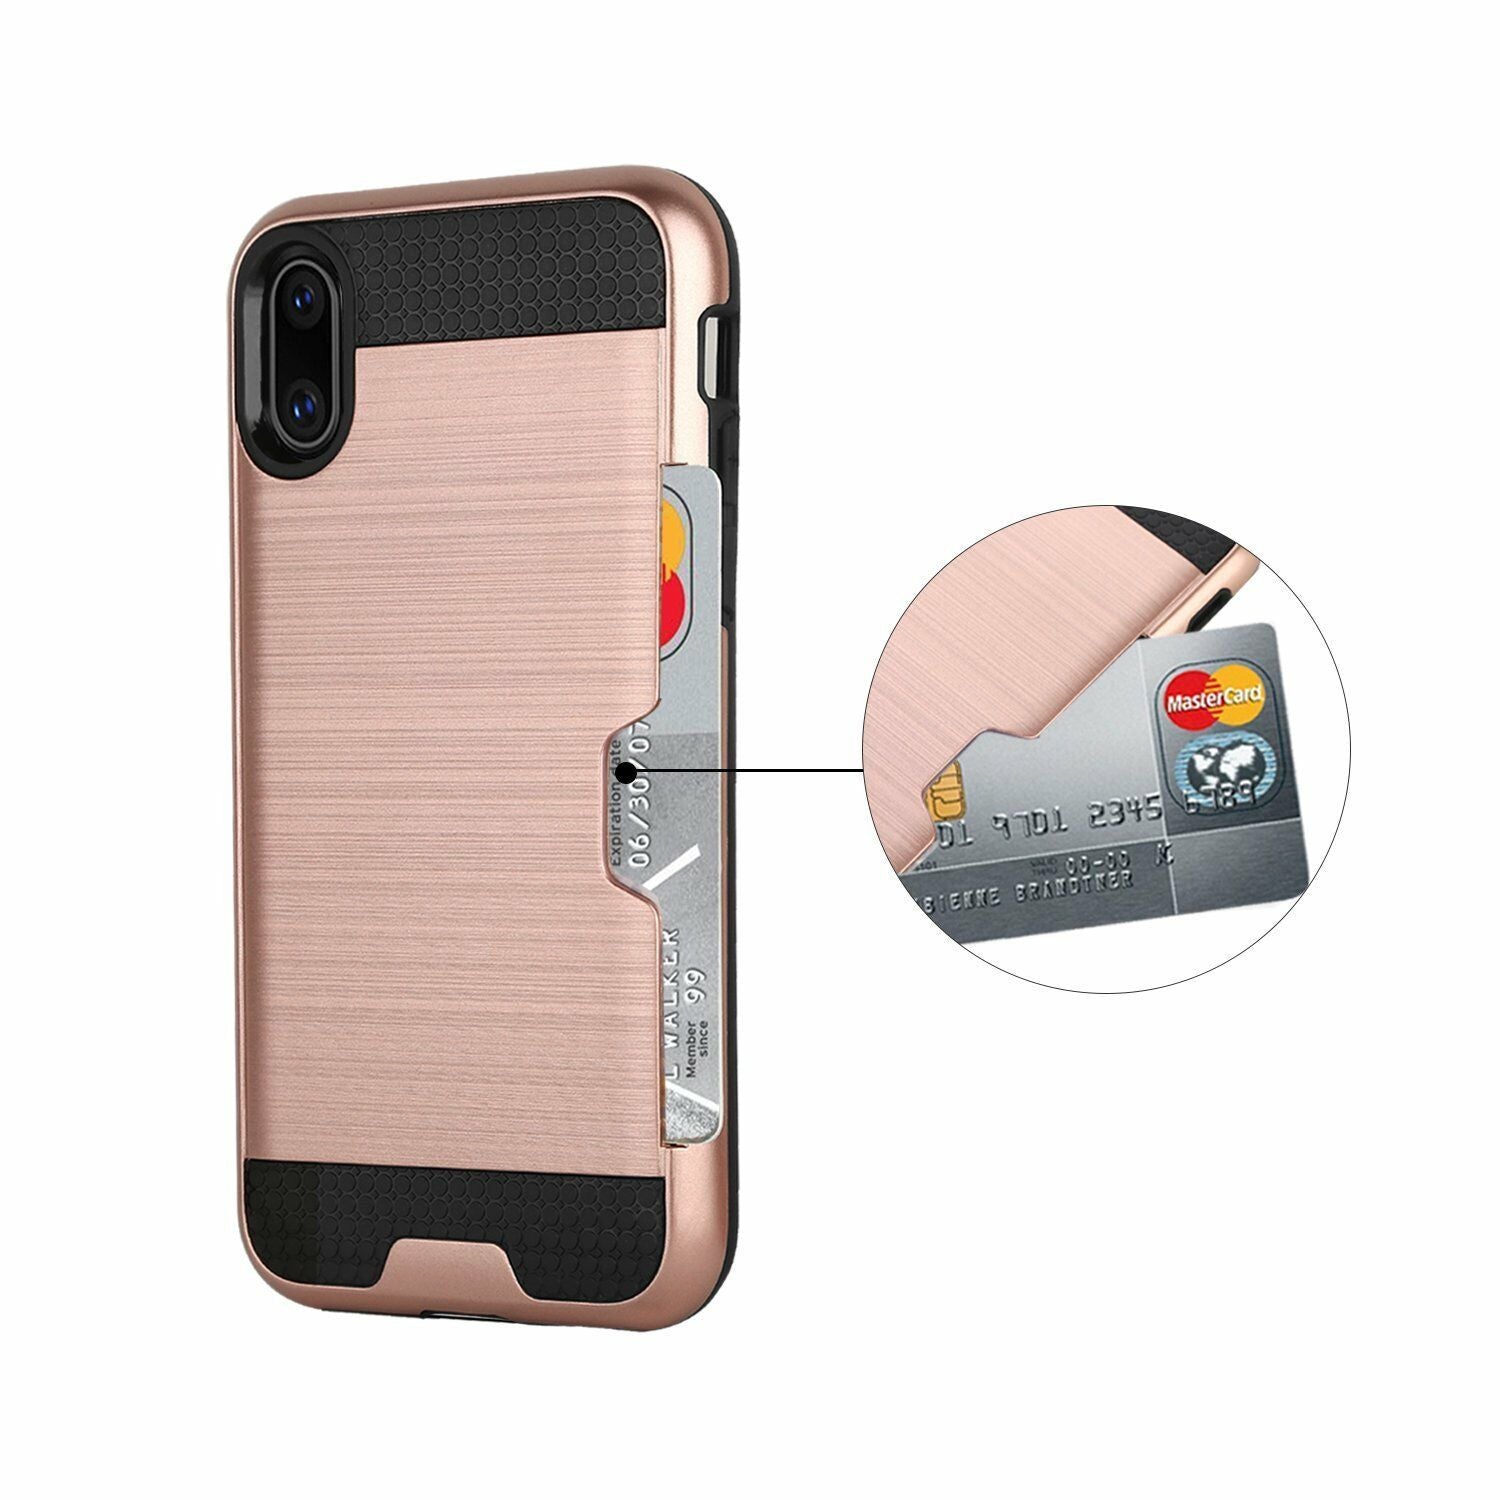 Case Fits Card Wallet Shockproof Bumper Hard Protective for iPhone